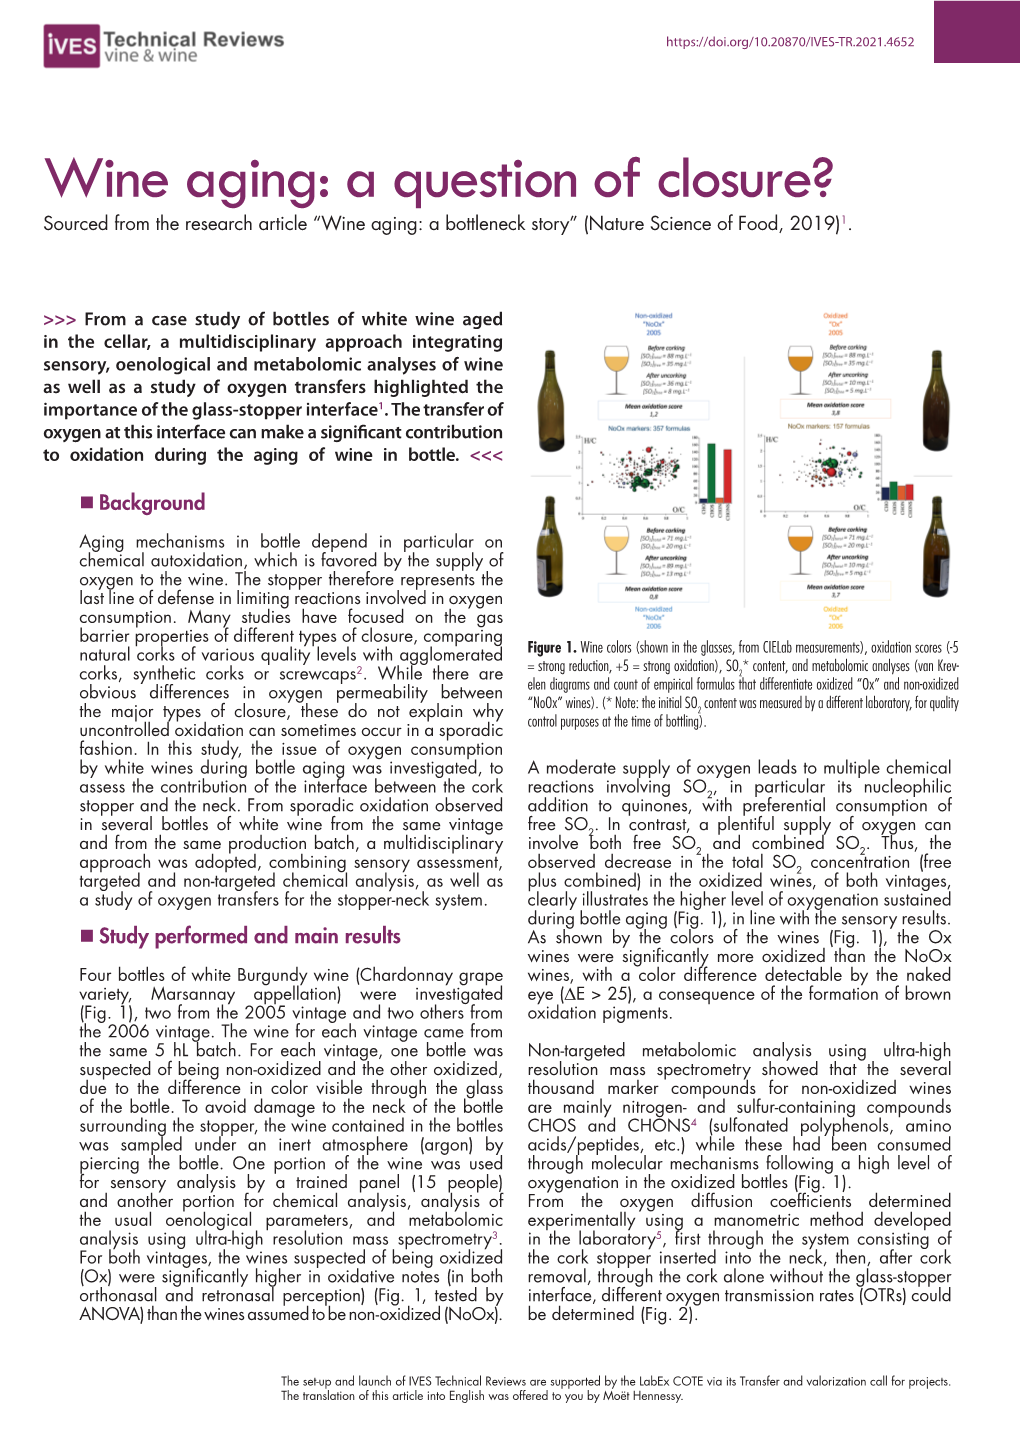 Wine Aging: a Question of Closure? Sourced from the Research Article “Wine Aging: a Bottleneck Story” (Nature Science of Food, 2019)1